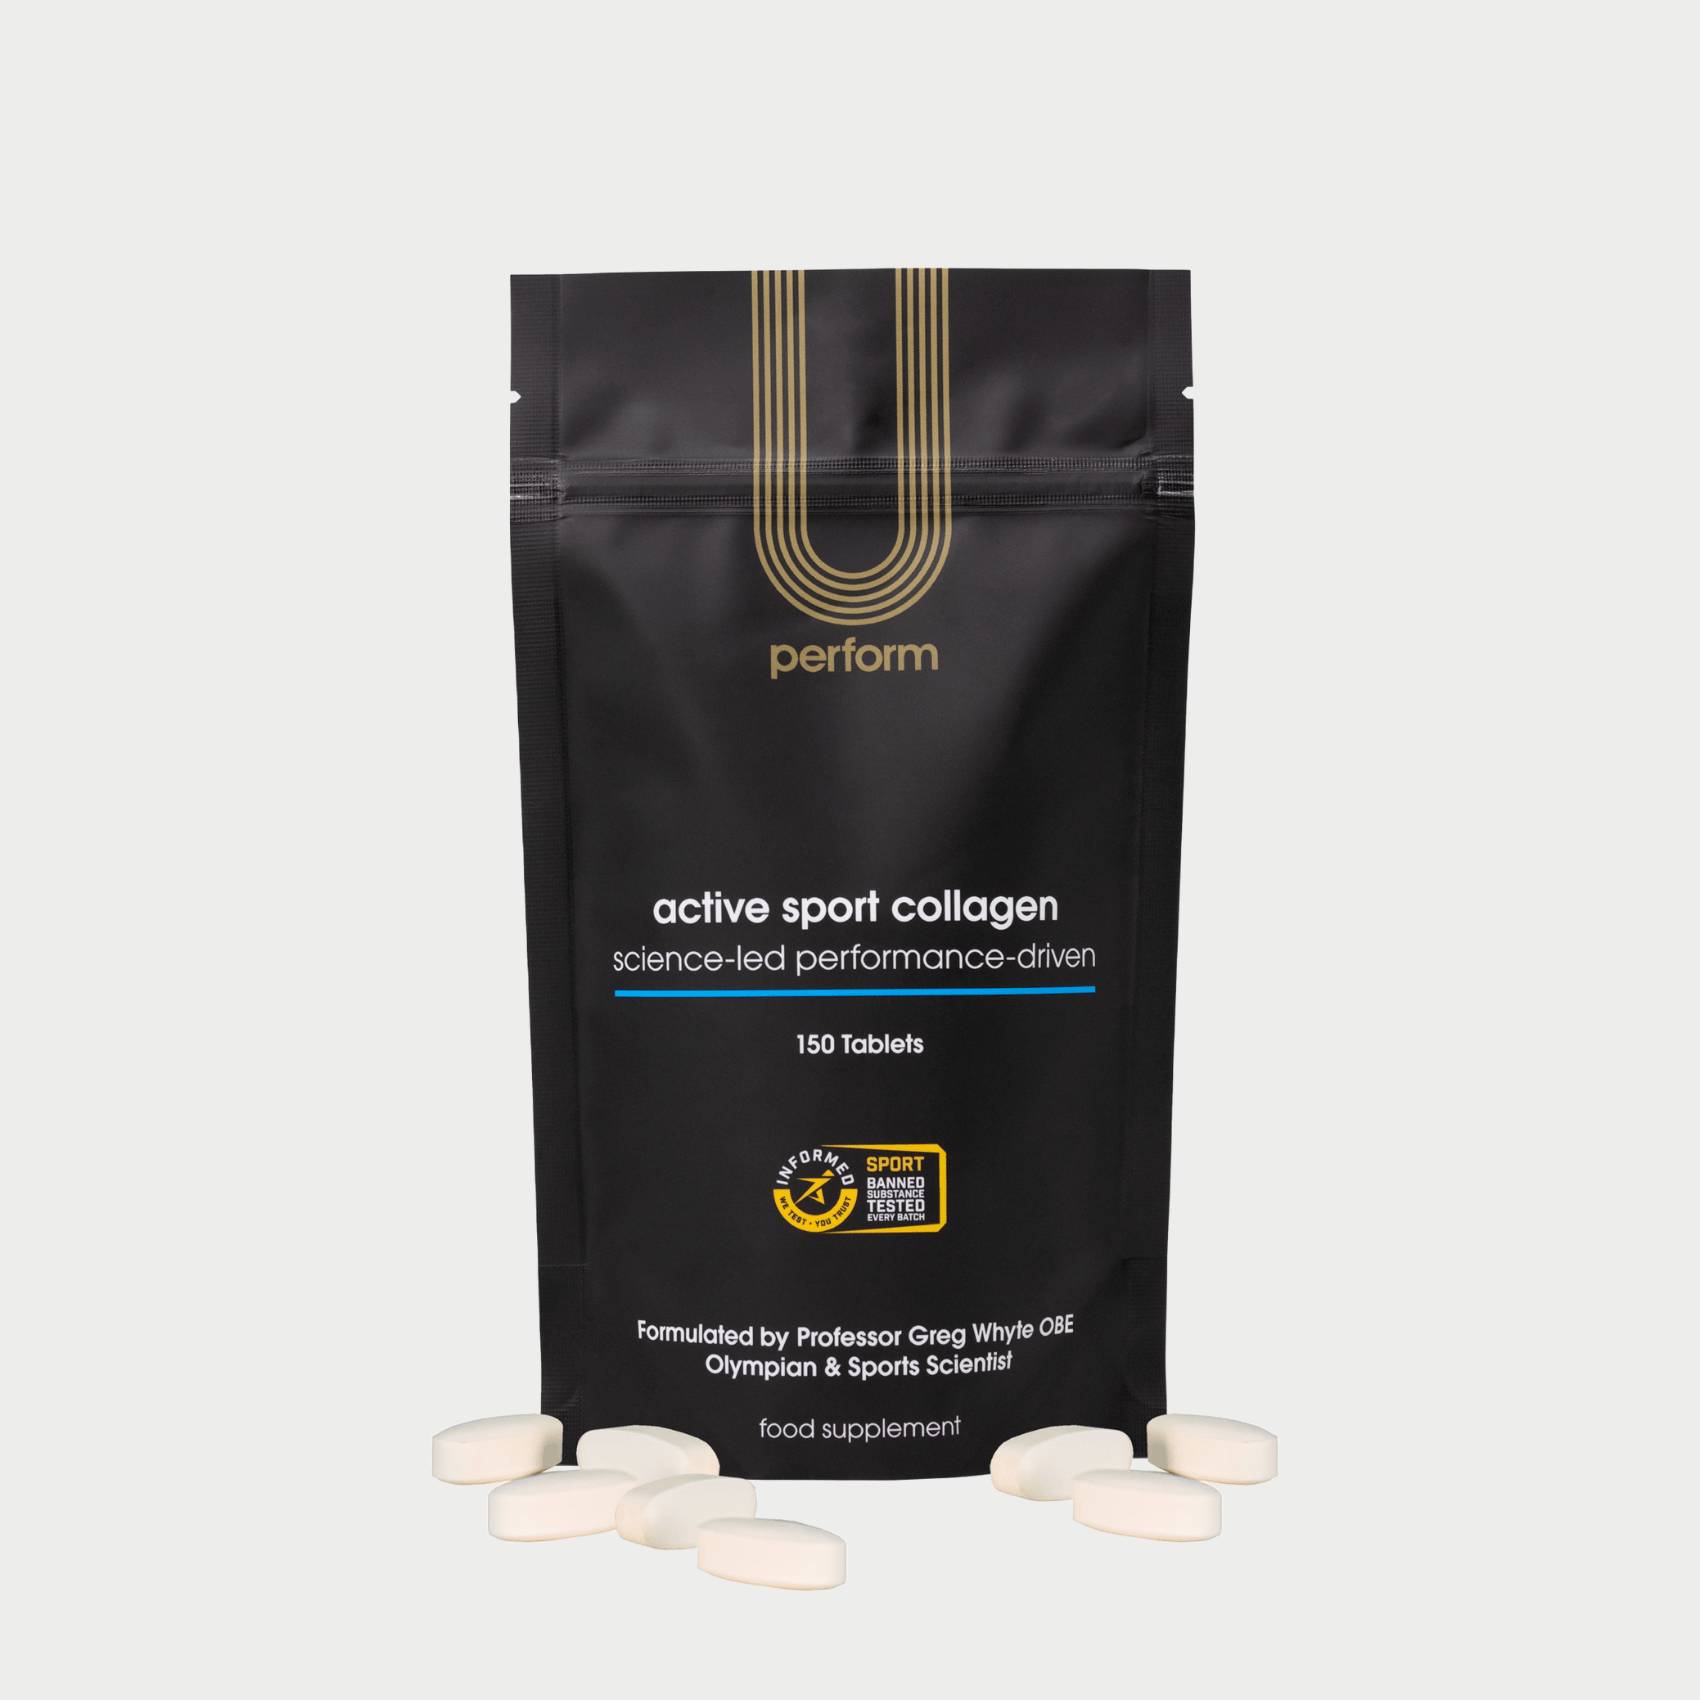 U Perform Active Sport Collagen Supplement Tablets product packaging black pouch standing with pile of collagen tablets in a pile next to packaging